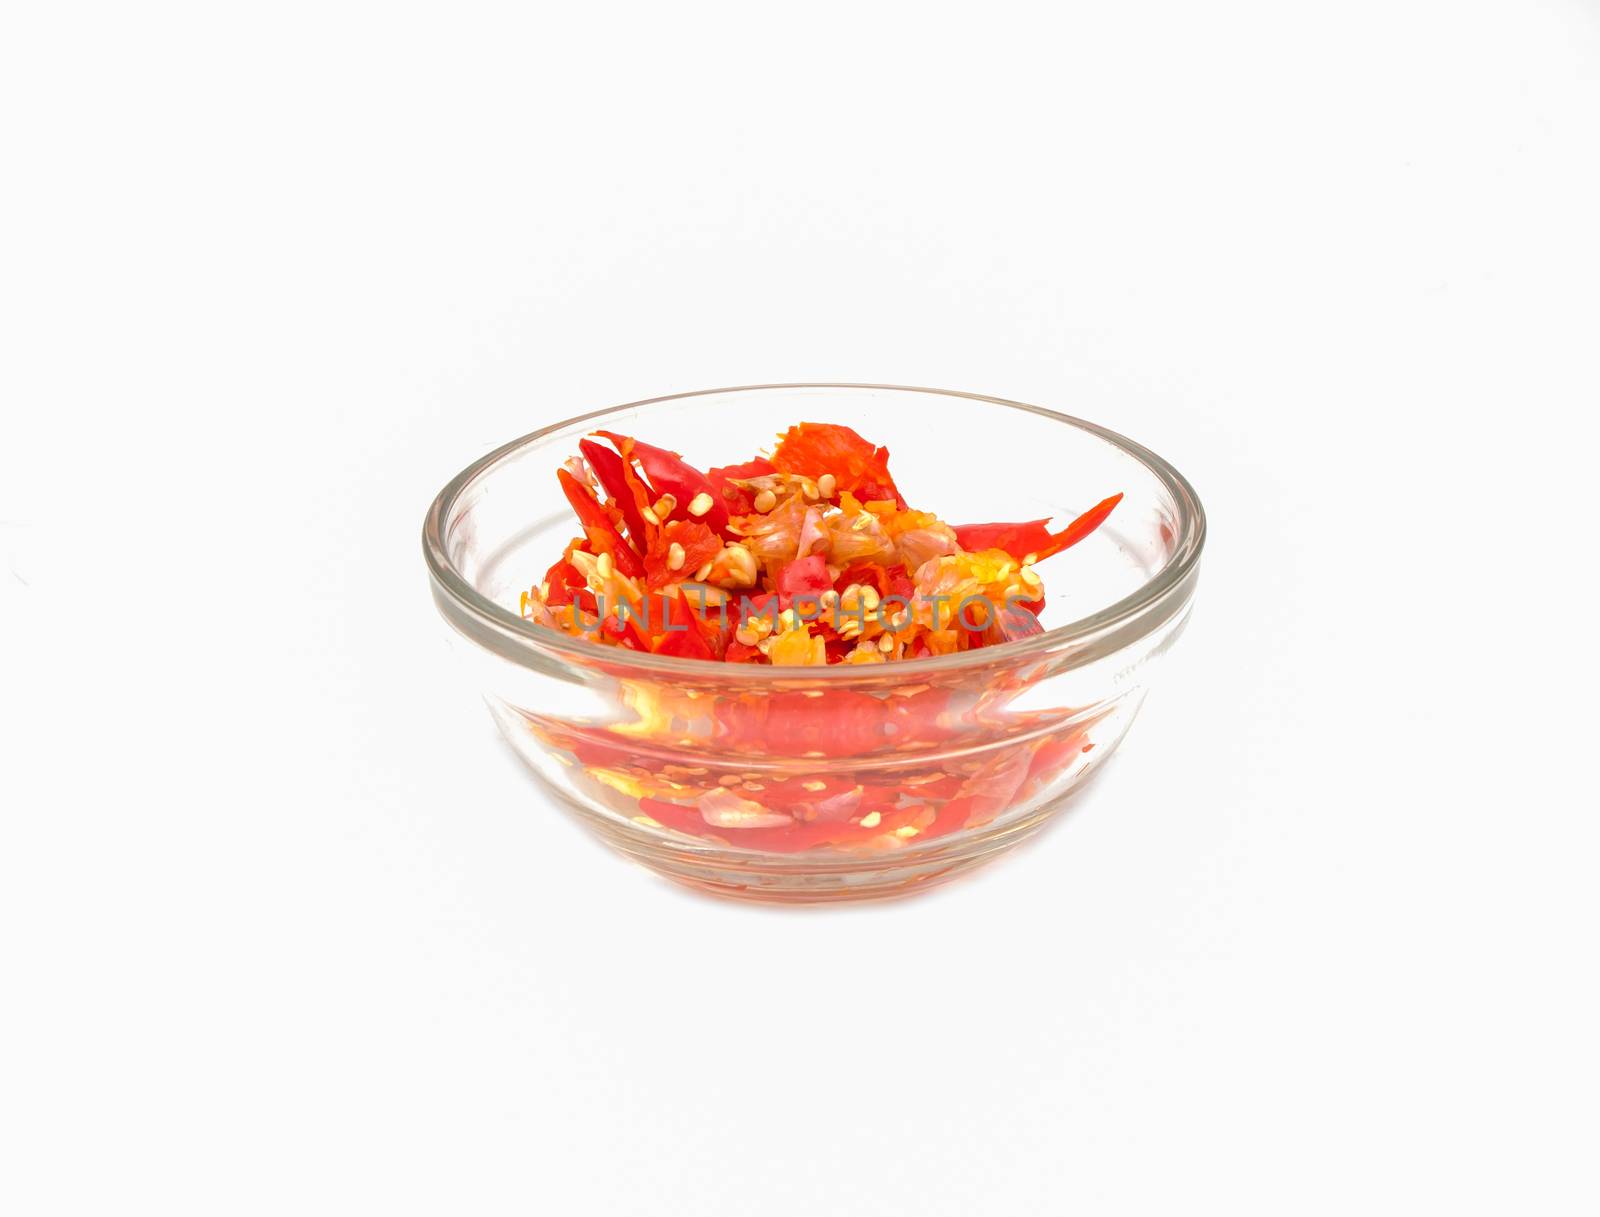 Crush chilli in the cup on white background